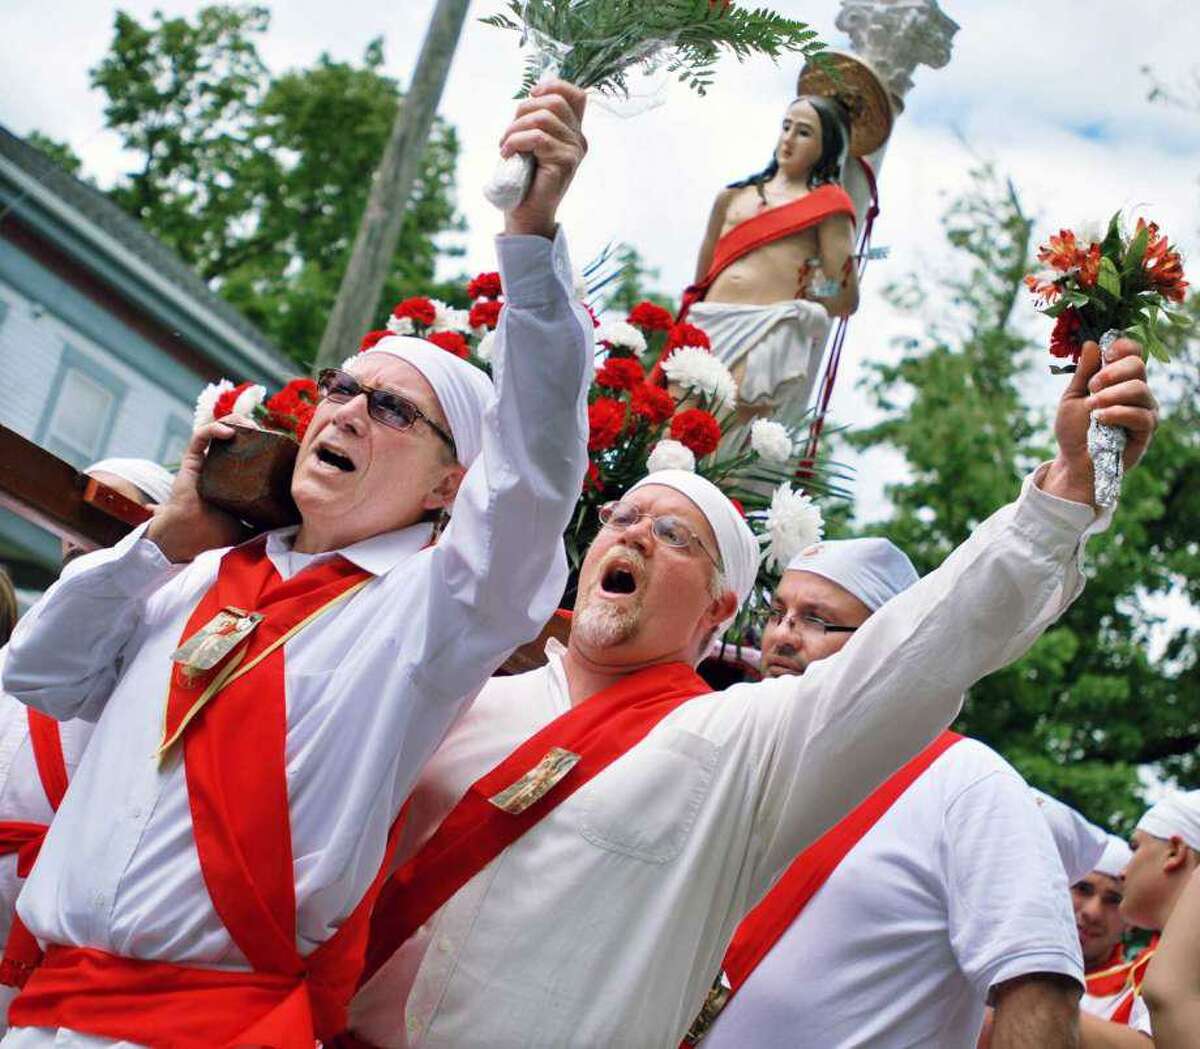 The Feast of St. Sebastian is celebrated in Middletown at the Roman Catholic Church on Washington Street. In Melilli, Sicily, Middletown’s sister city, the patron saint has been feted for more than 600 years. This year, the event returns May 13 to 15 after a two-year hiatus due to the pandemic.